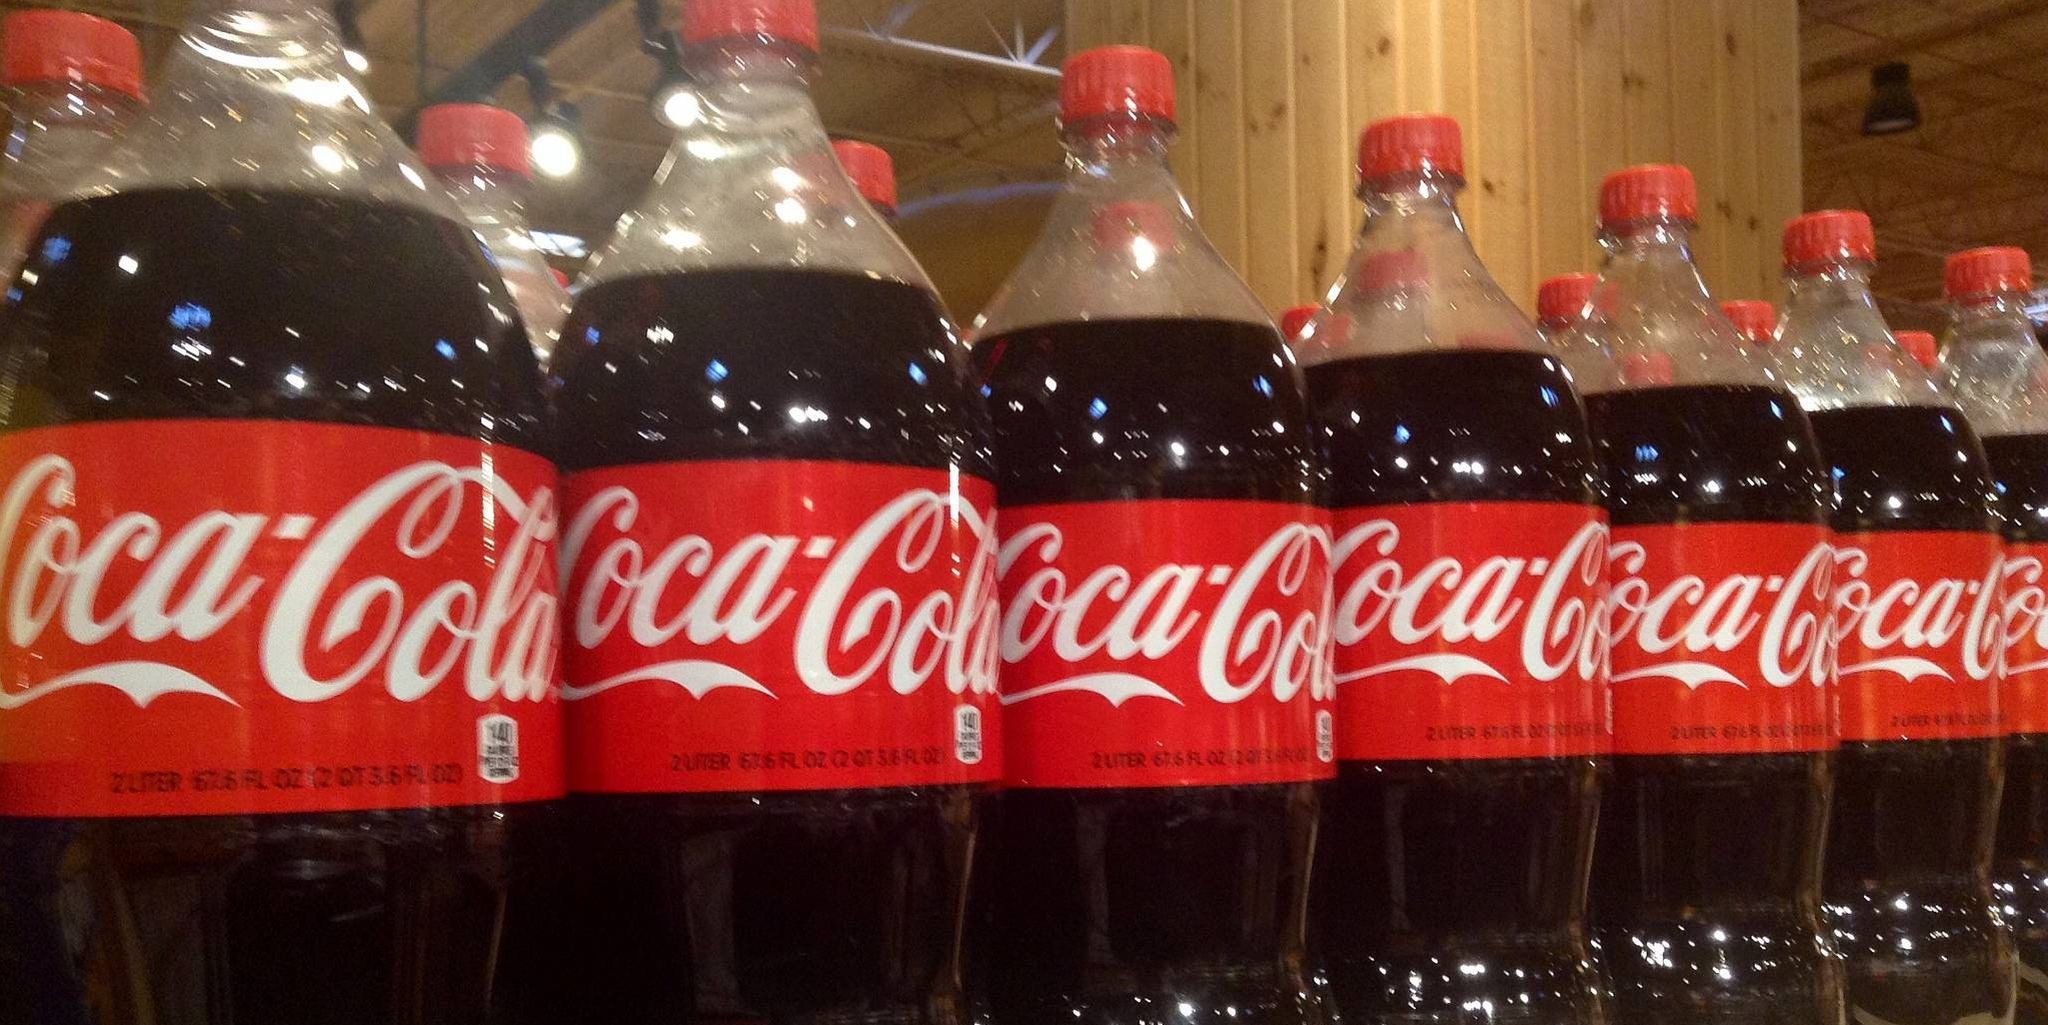 coca cola can 2022 with names